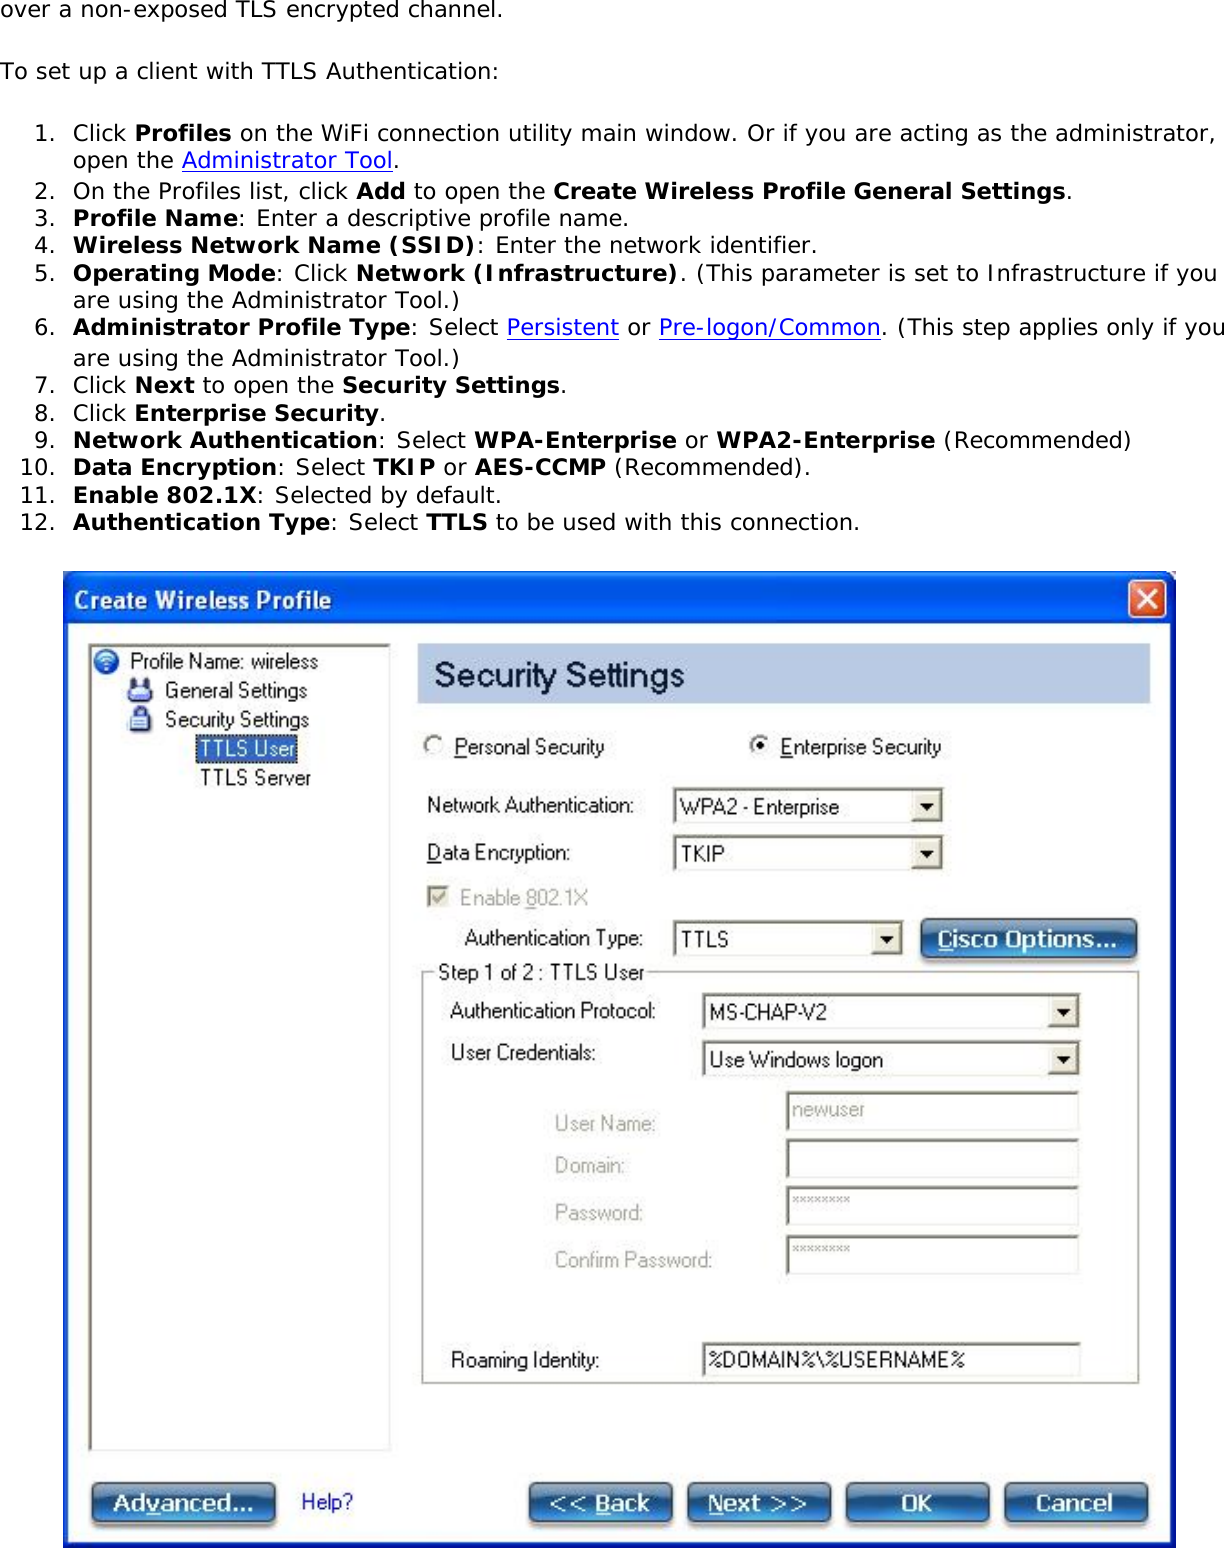 over a non-exposed TLS encrypted channel.To set up a client with TTLS Authentication:1.  Click Profiles on the WiFi connection utility main window. Or if you are acting as the administrator, open the Administrator Tool. 2.  On the Profiles list, click Add to open the Create Wireless Profile General Settings.3.  Profile Name: Enter a descriptive profile name.4.  Wireless Network Name (SSID): Enter the network identifier.5.  Operating Mode: Click Network (Infrastructure). (This parameter is set to Infrastructure if you are using the Administrator Tool.)6.  Administrator Profile Type: Select Persistent or Pre-logon/Common. (This step applies only if you are using the Administrator Tool.)7.  Click Next to open the Security Settings.8.  Click Enterprise Security.9.  Network Authentication: Select WPA-Enterprise or WPA2-Enterprise (Recommended)10.  Data Encryption: Select TKIP or AES-CCMP (Recommended).11.  Enable 802.1X: Selected by default.12.  Authentication Type: Select TTLS to be used with this connection.